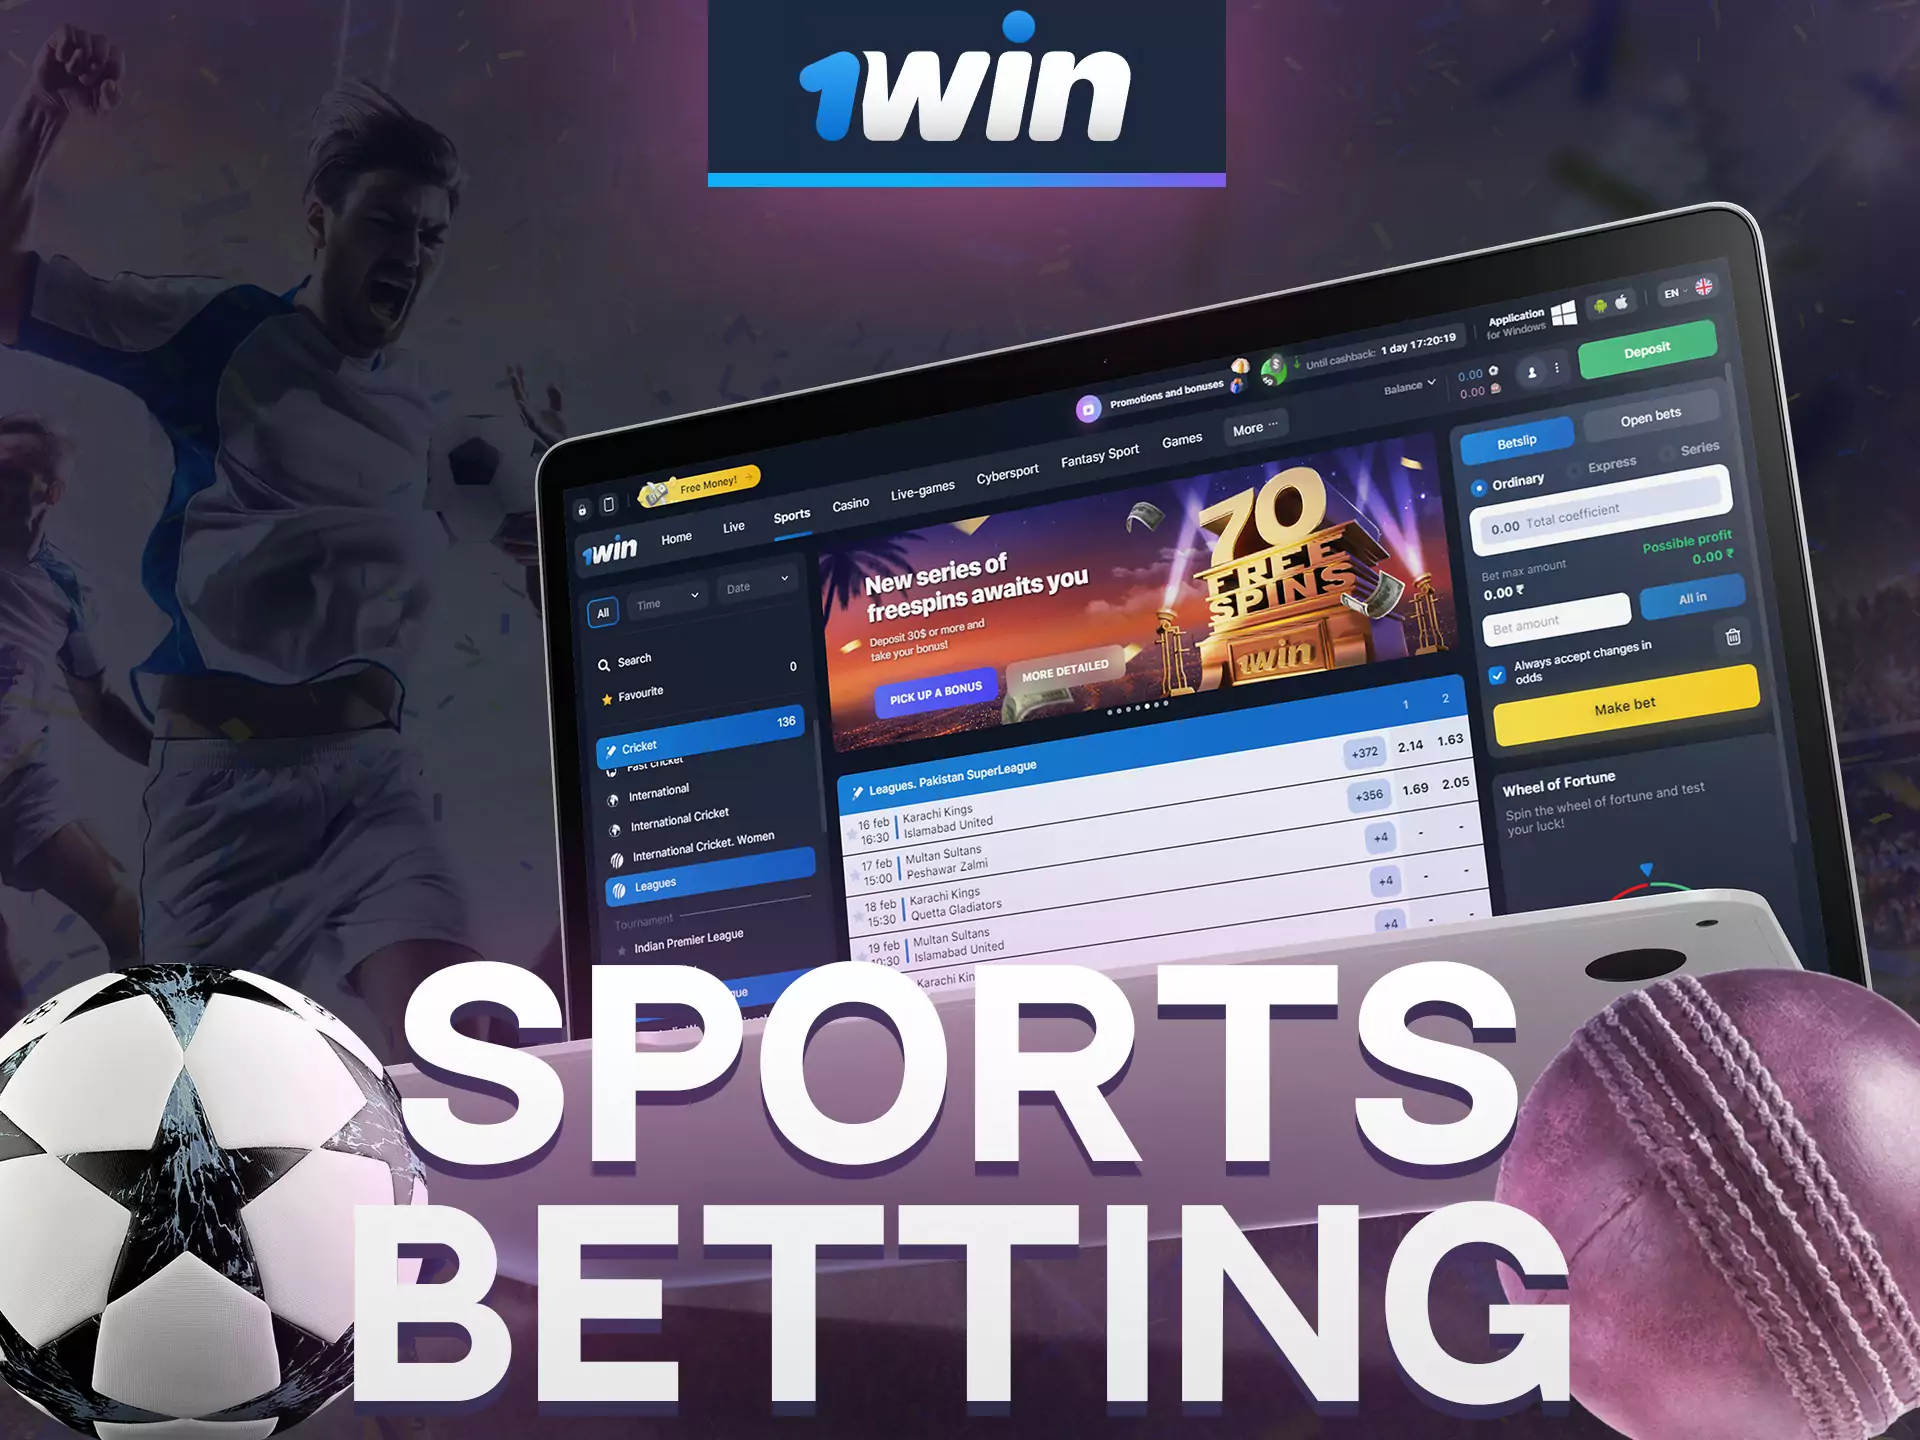 Make bets on different sports at 1win.